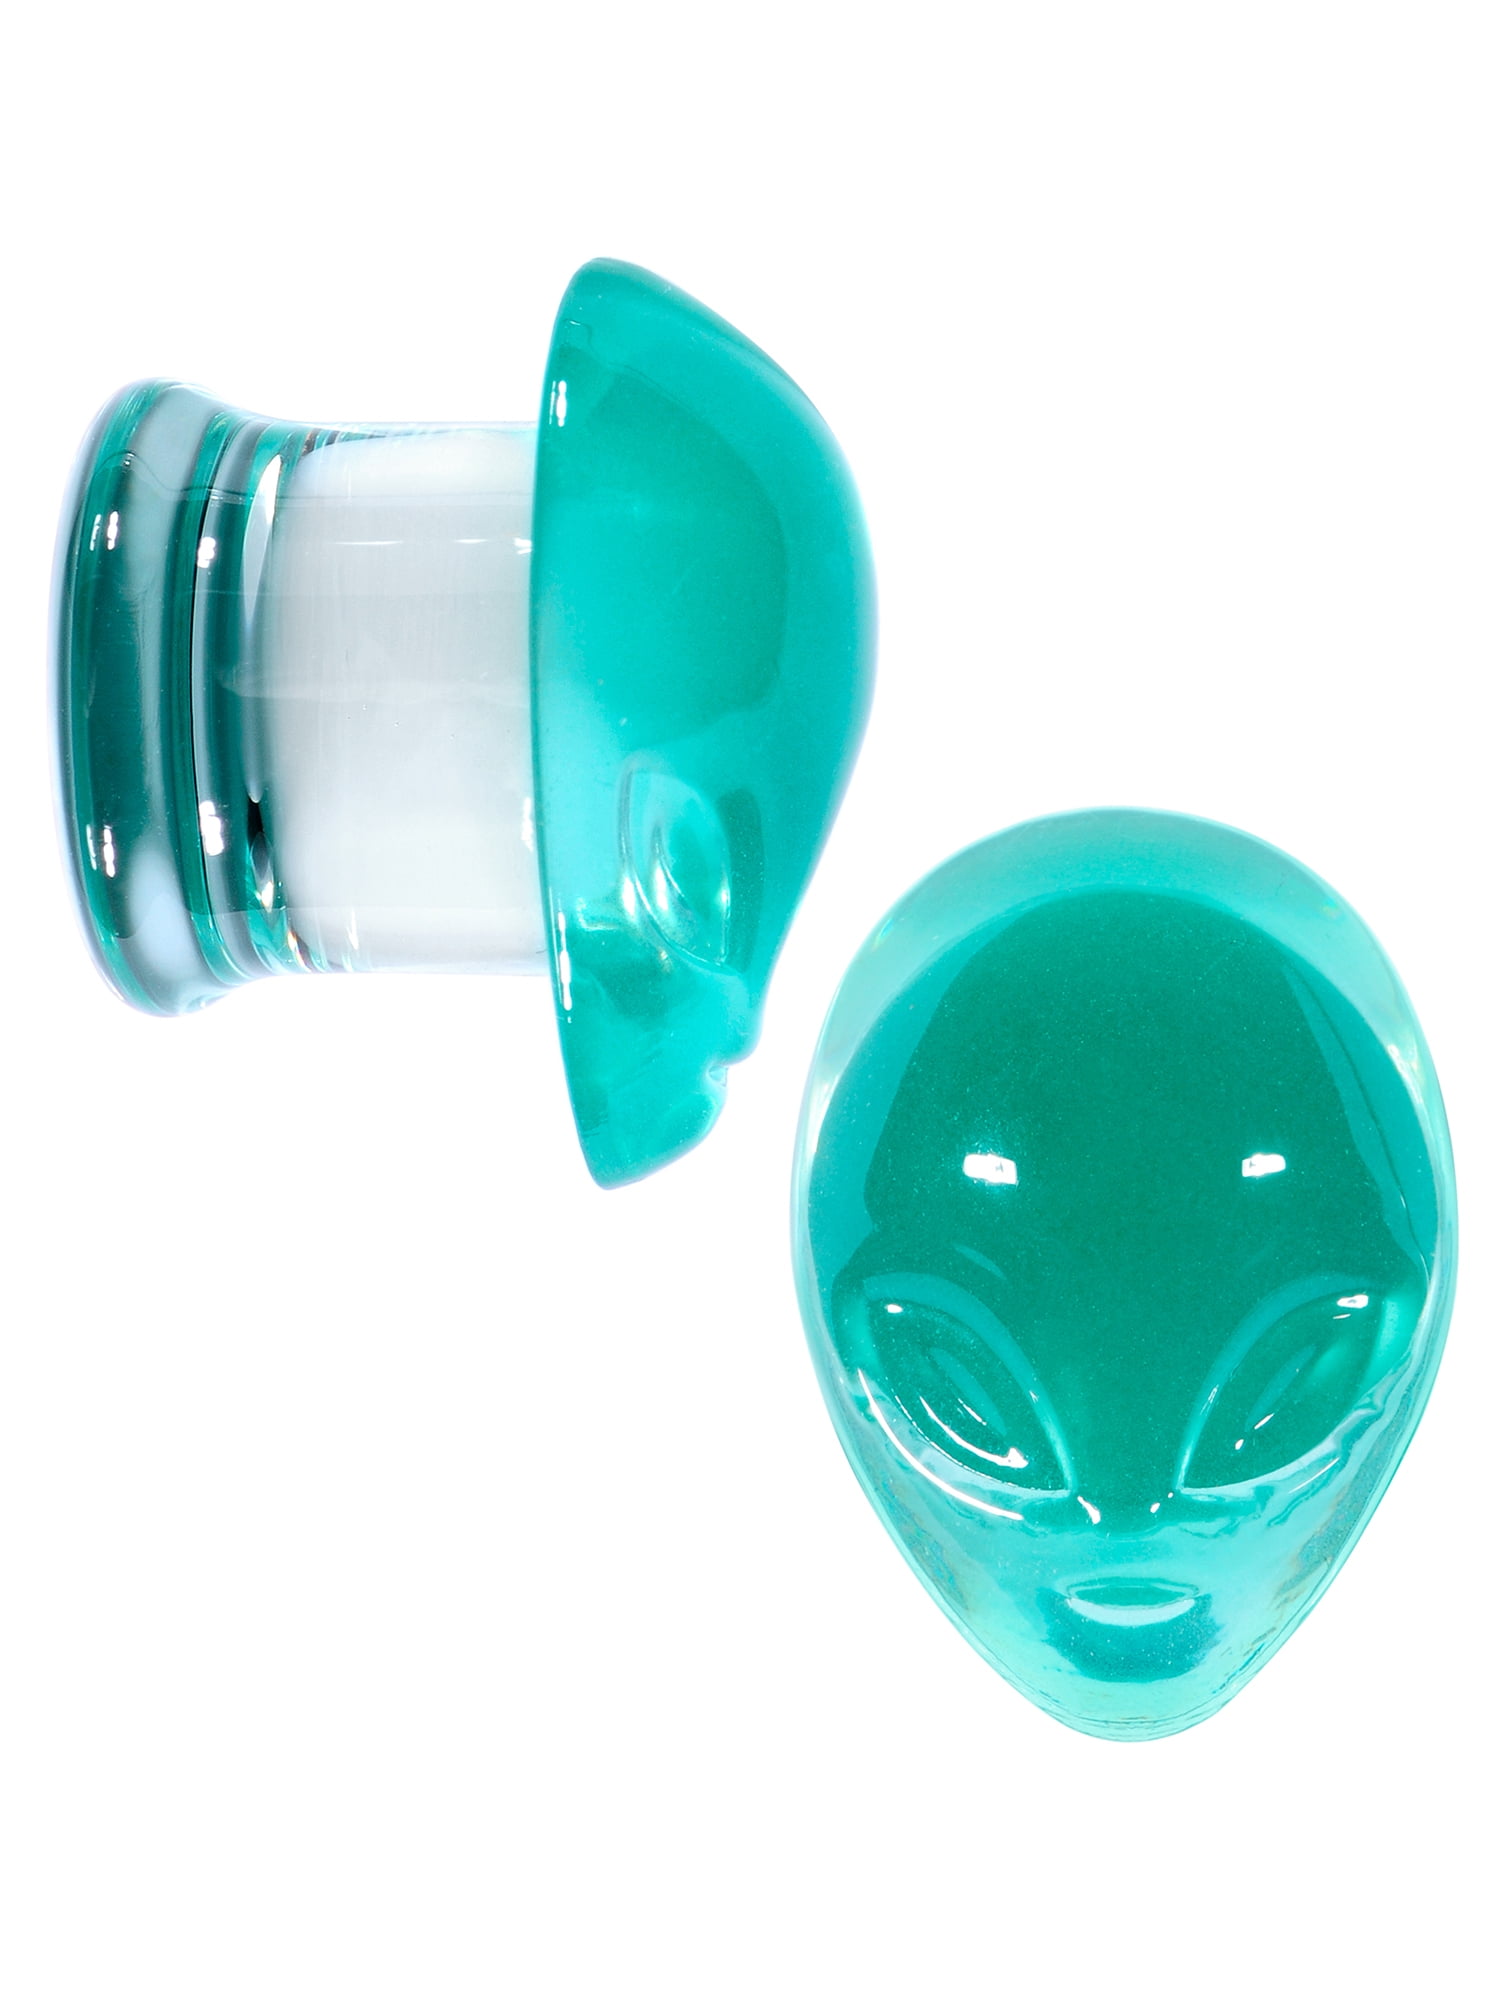 Body Candy 2Pc Clear Green Pyrex Glass Double Flare Plug Alien Ear Plug Gauges Set of 2